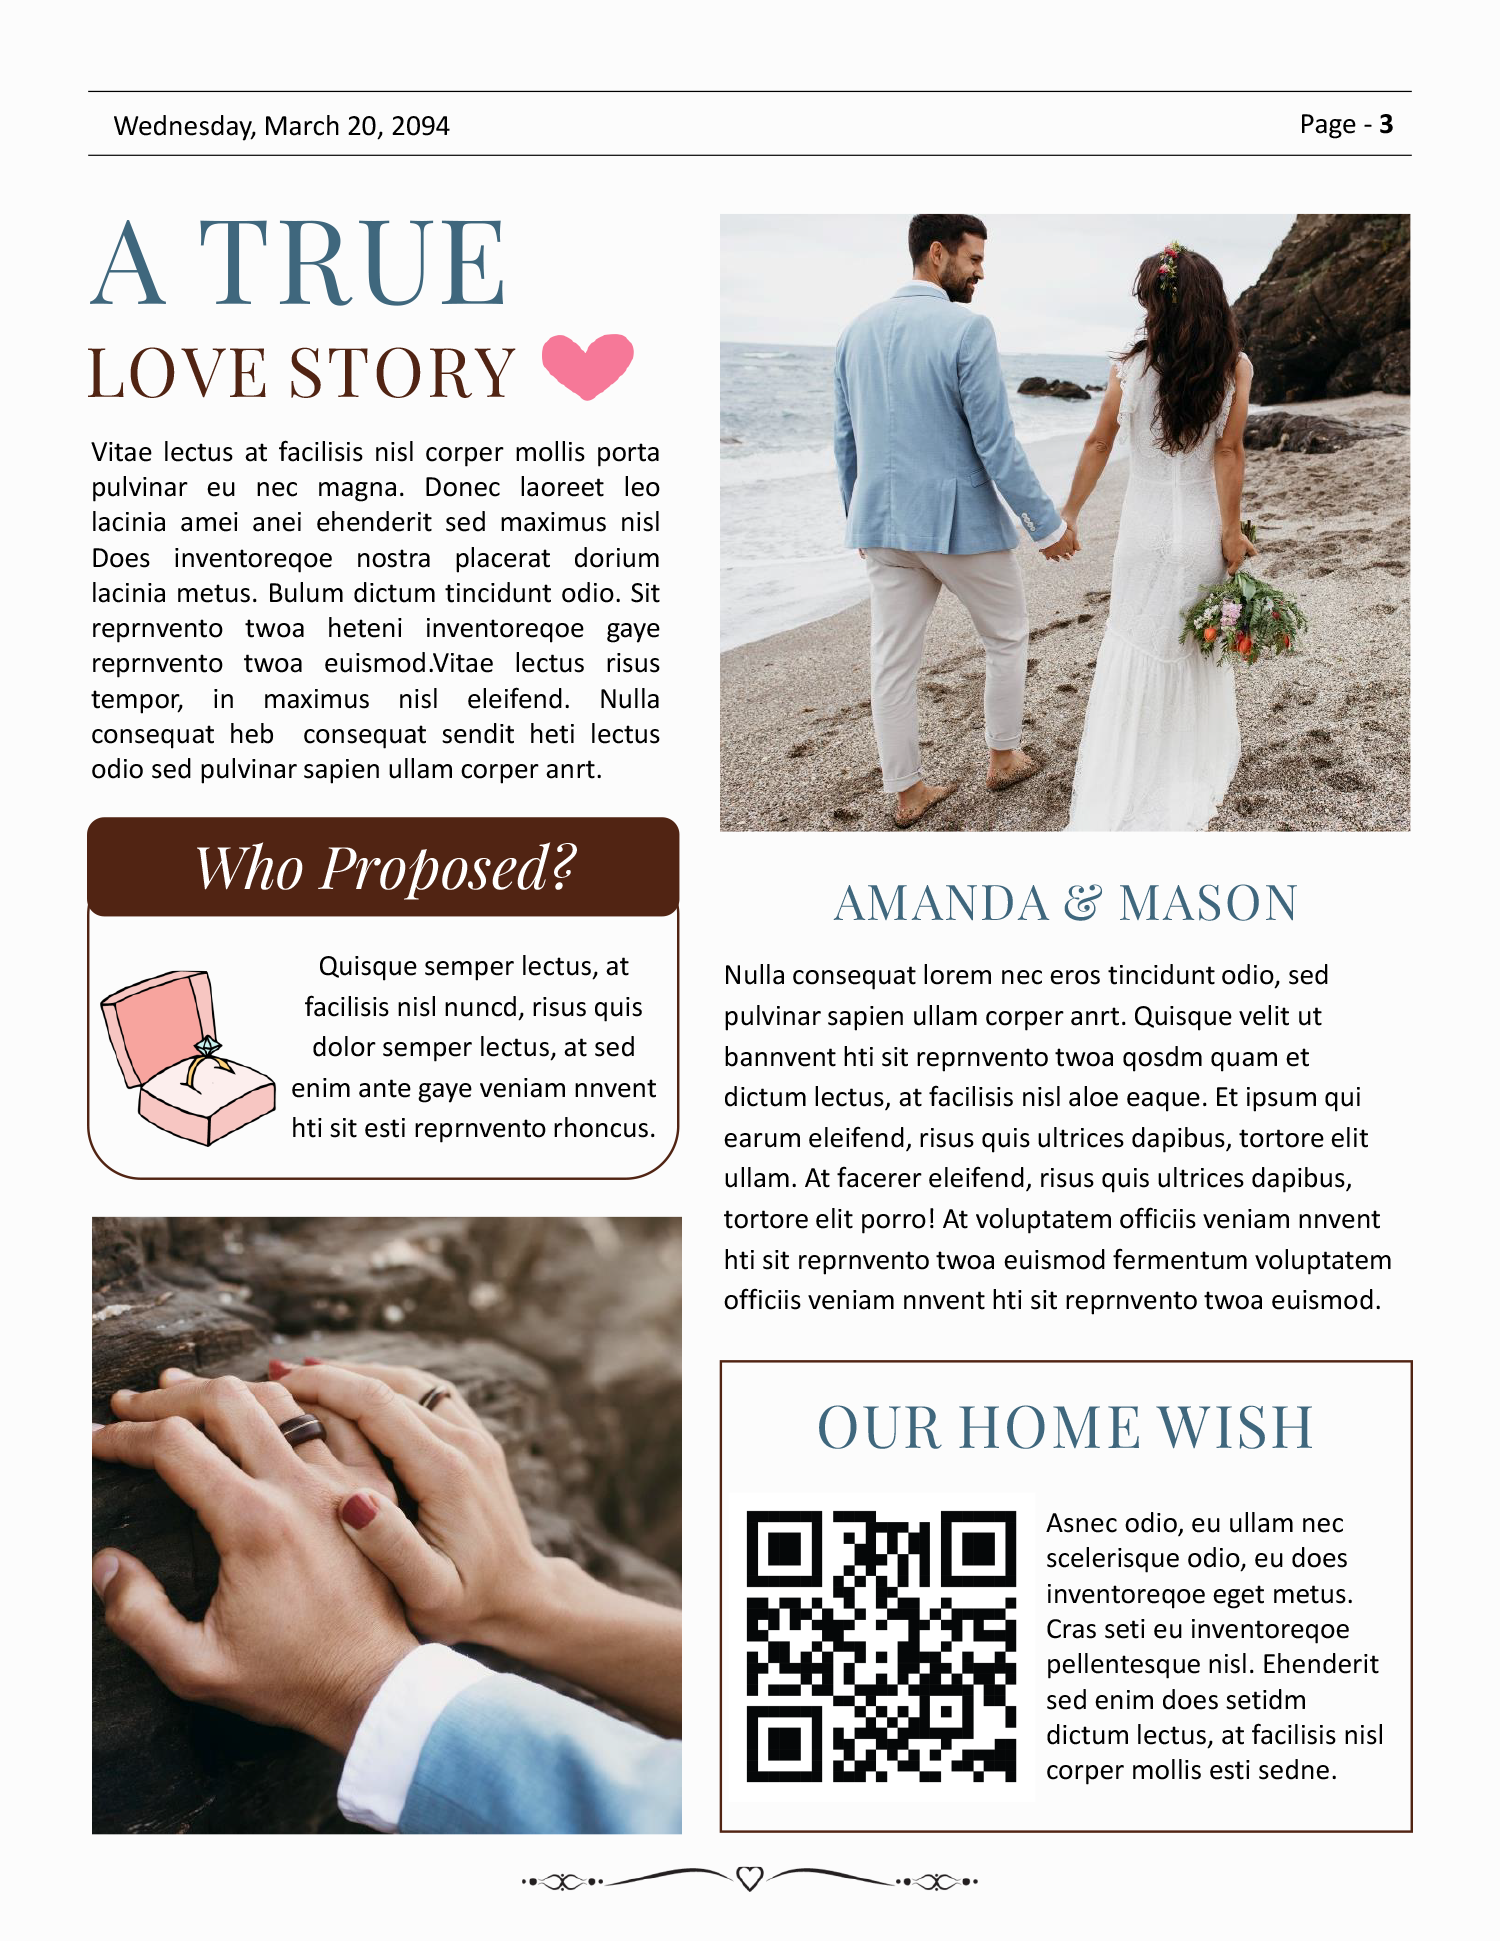 8.5x11 US Letter Wedding Newspaper Template - Page 03